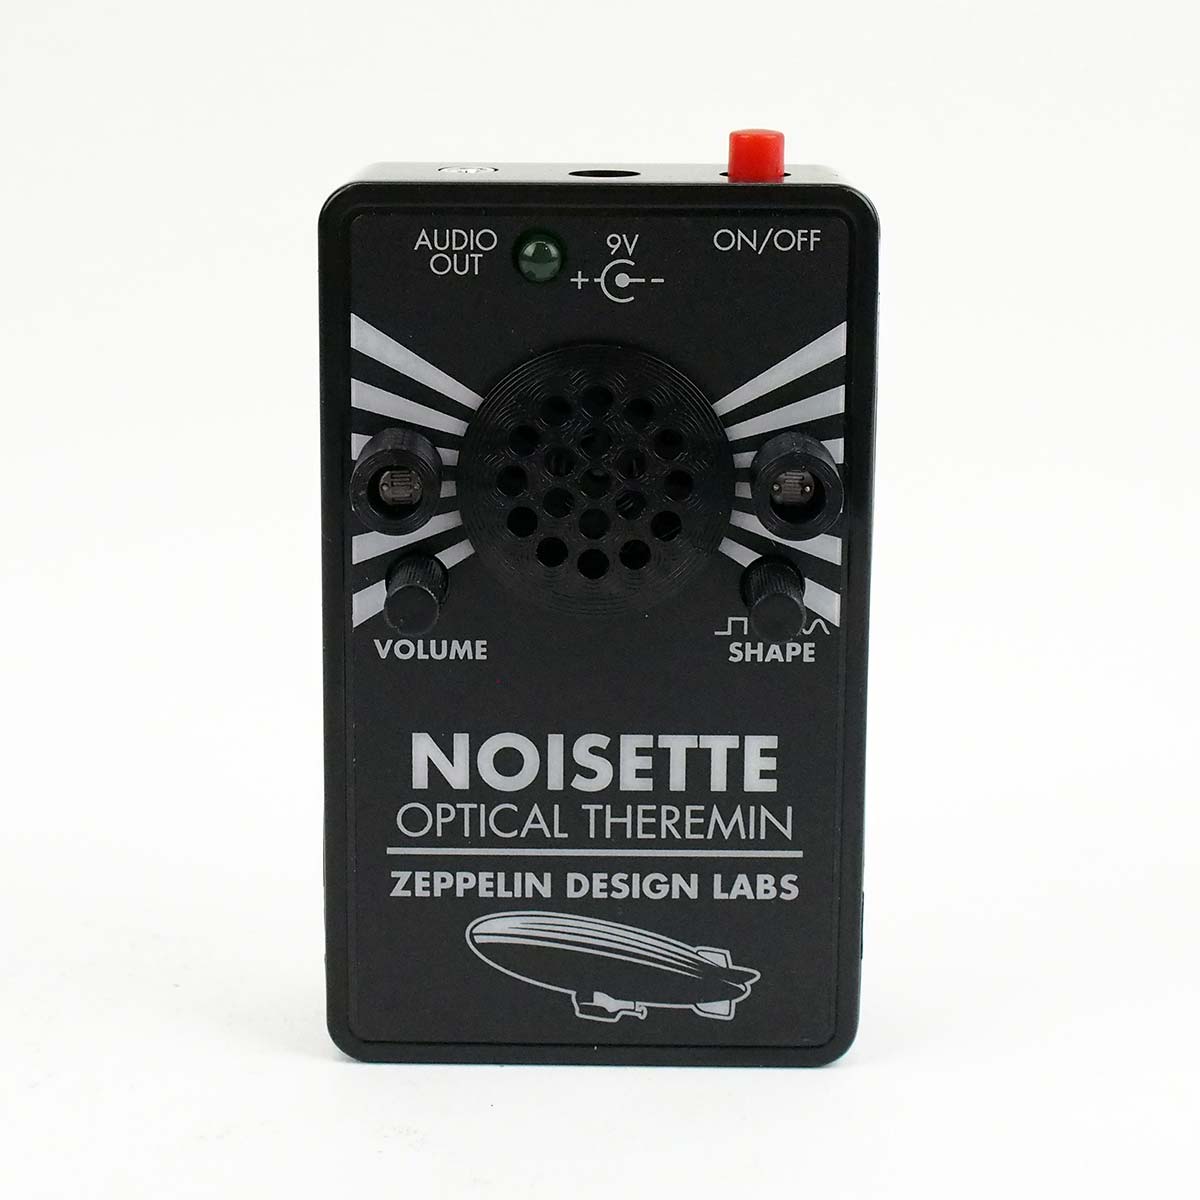 Zeppelin Design Labs Releases The Noisette Optical Theremin ...